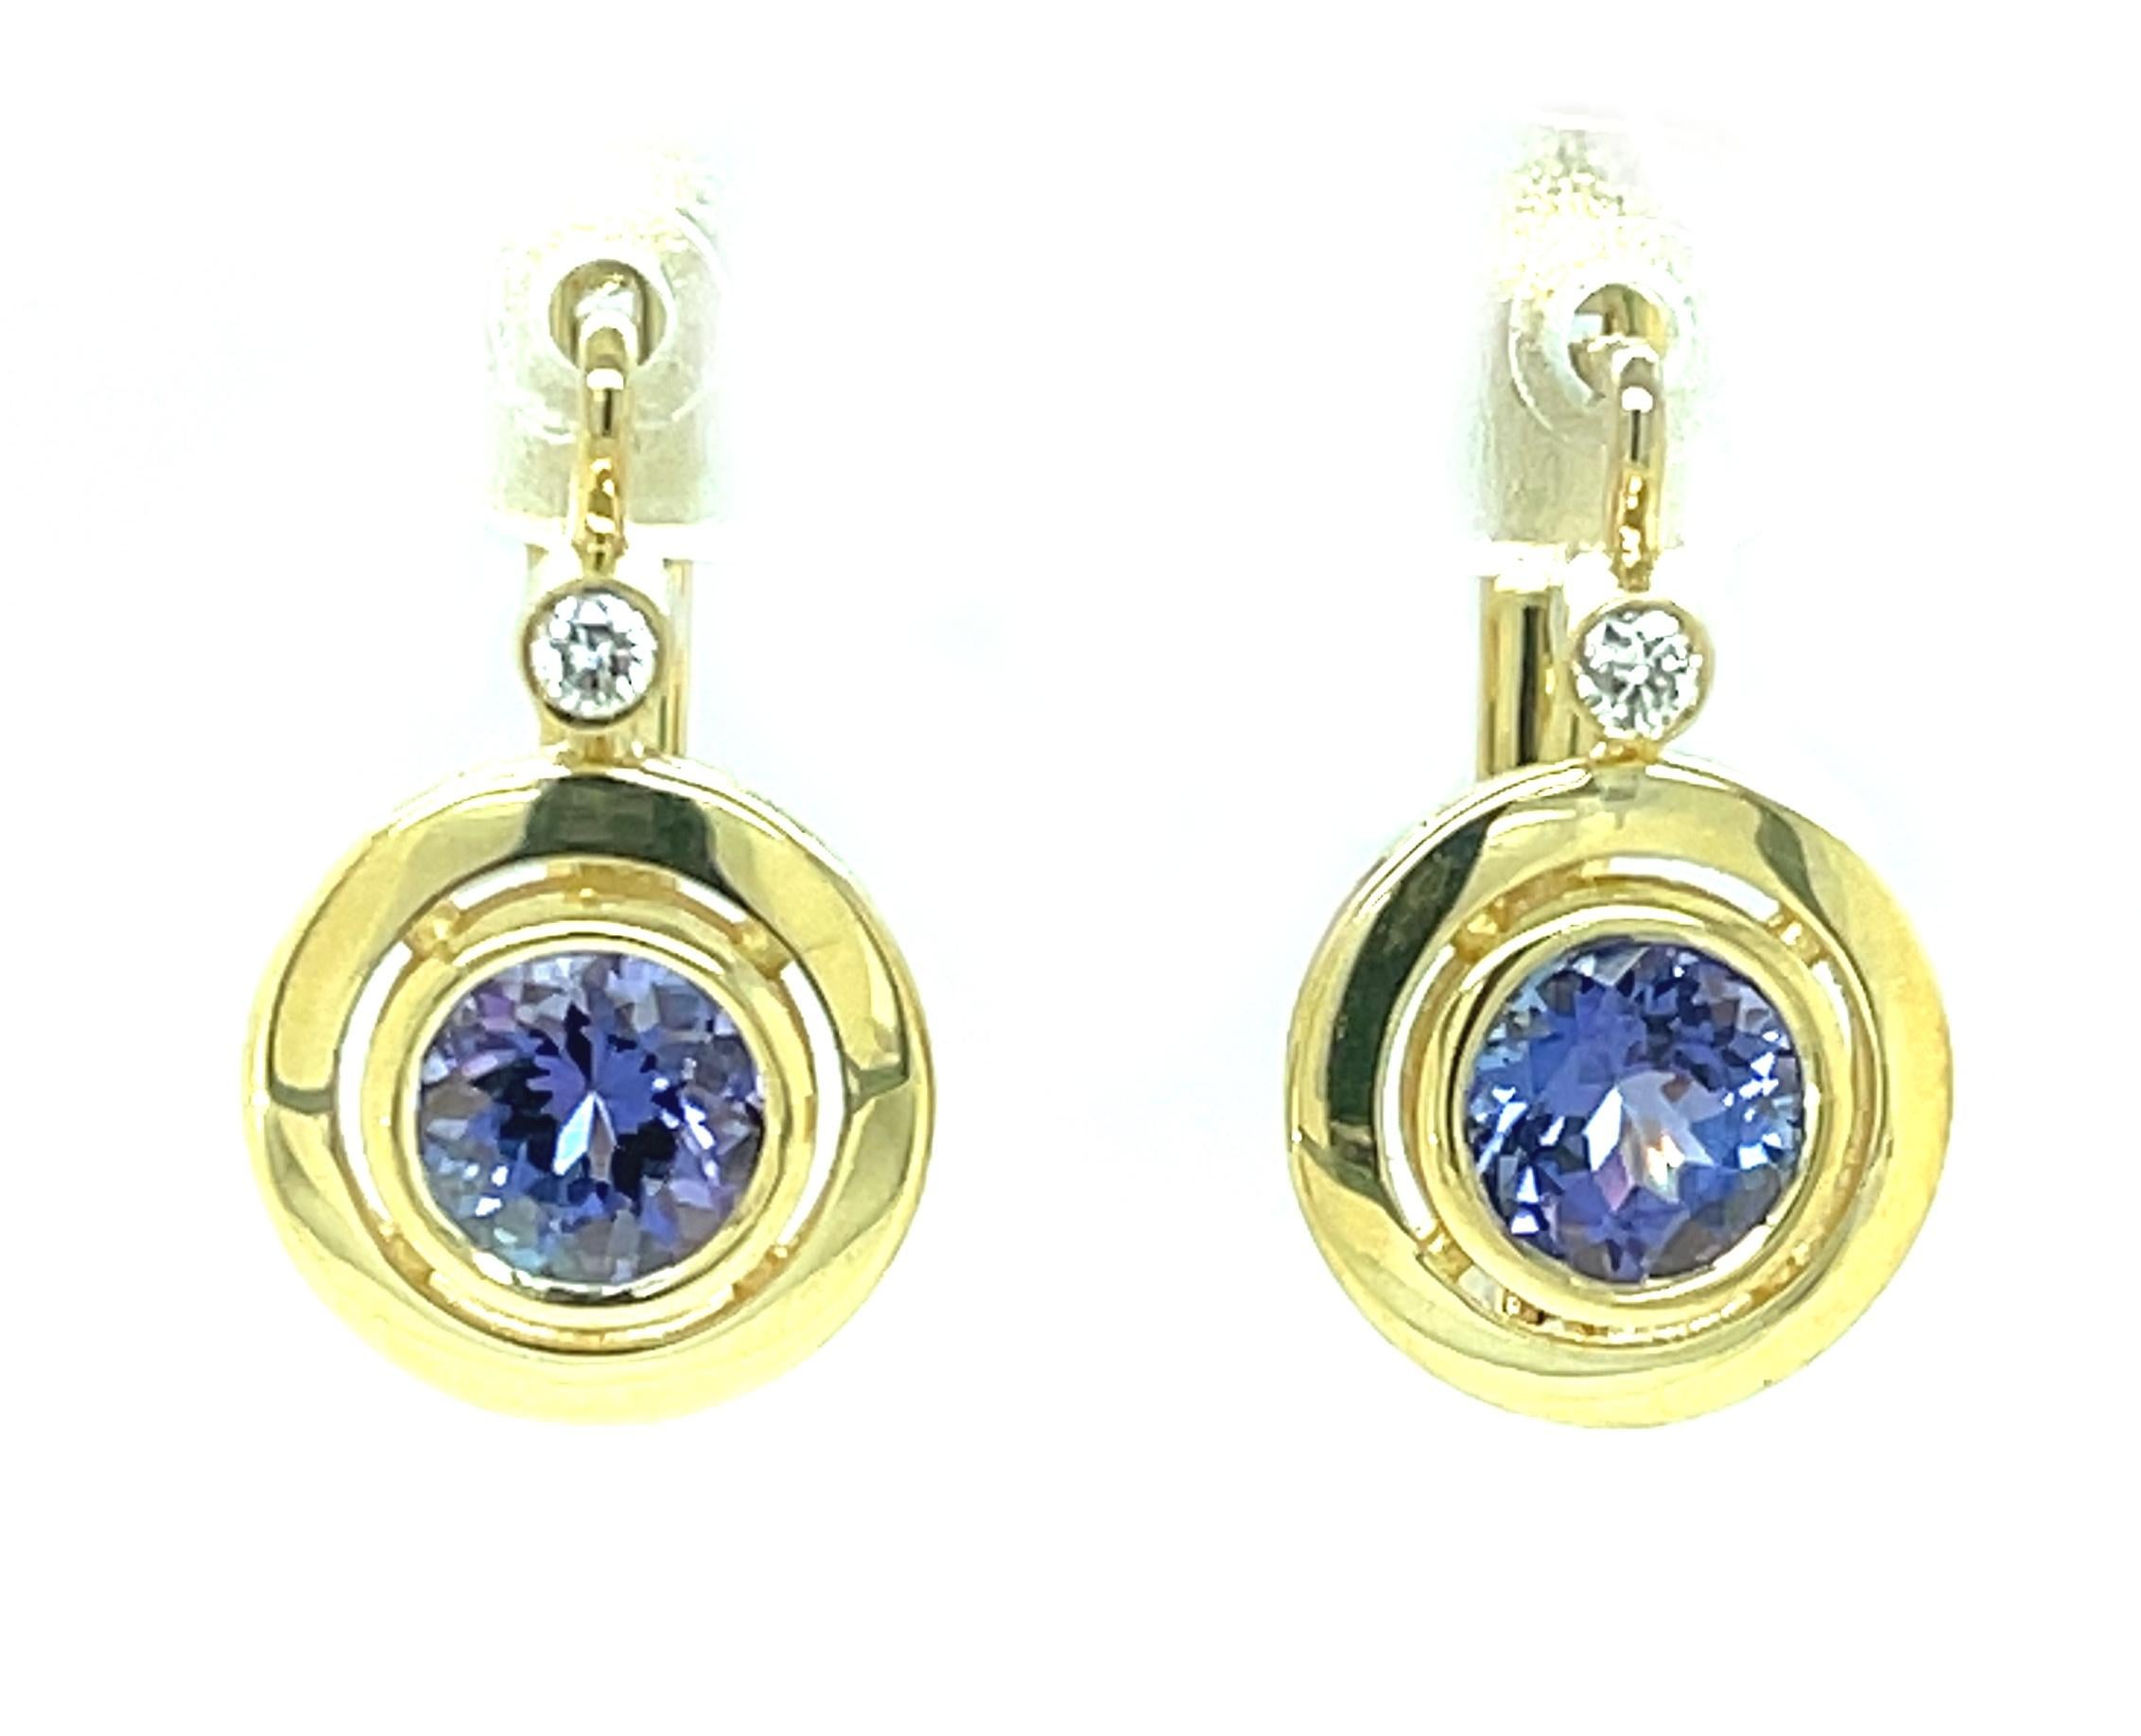 These tanzanite and diamond drop earrings will add a pop of color and elegance to any look! The gorgeous blue-violet tanzanites are the color of African violets in bloom, set in rich 18k yellow gold and topped with round brilliant white diamonds for